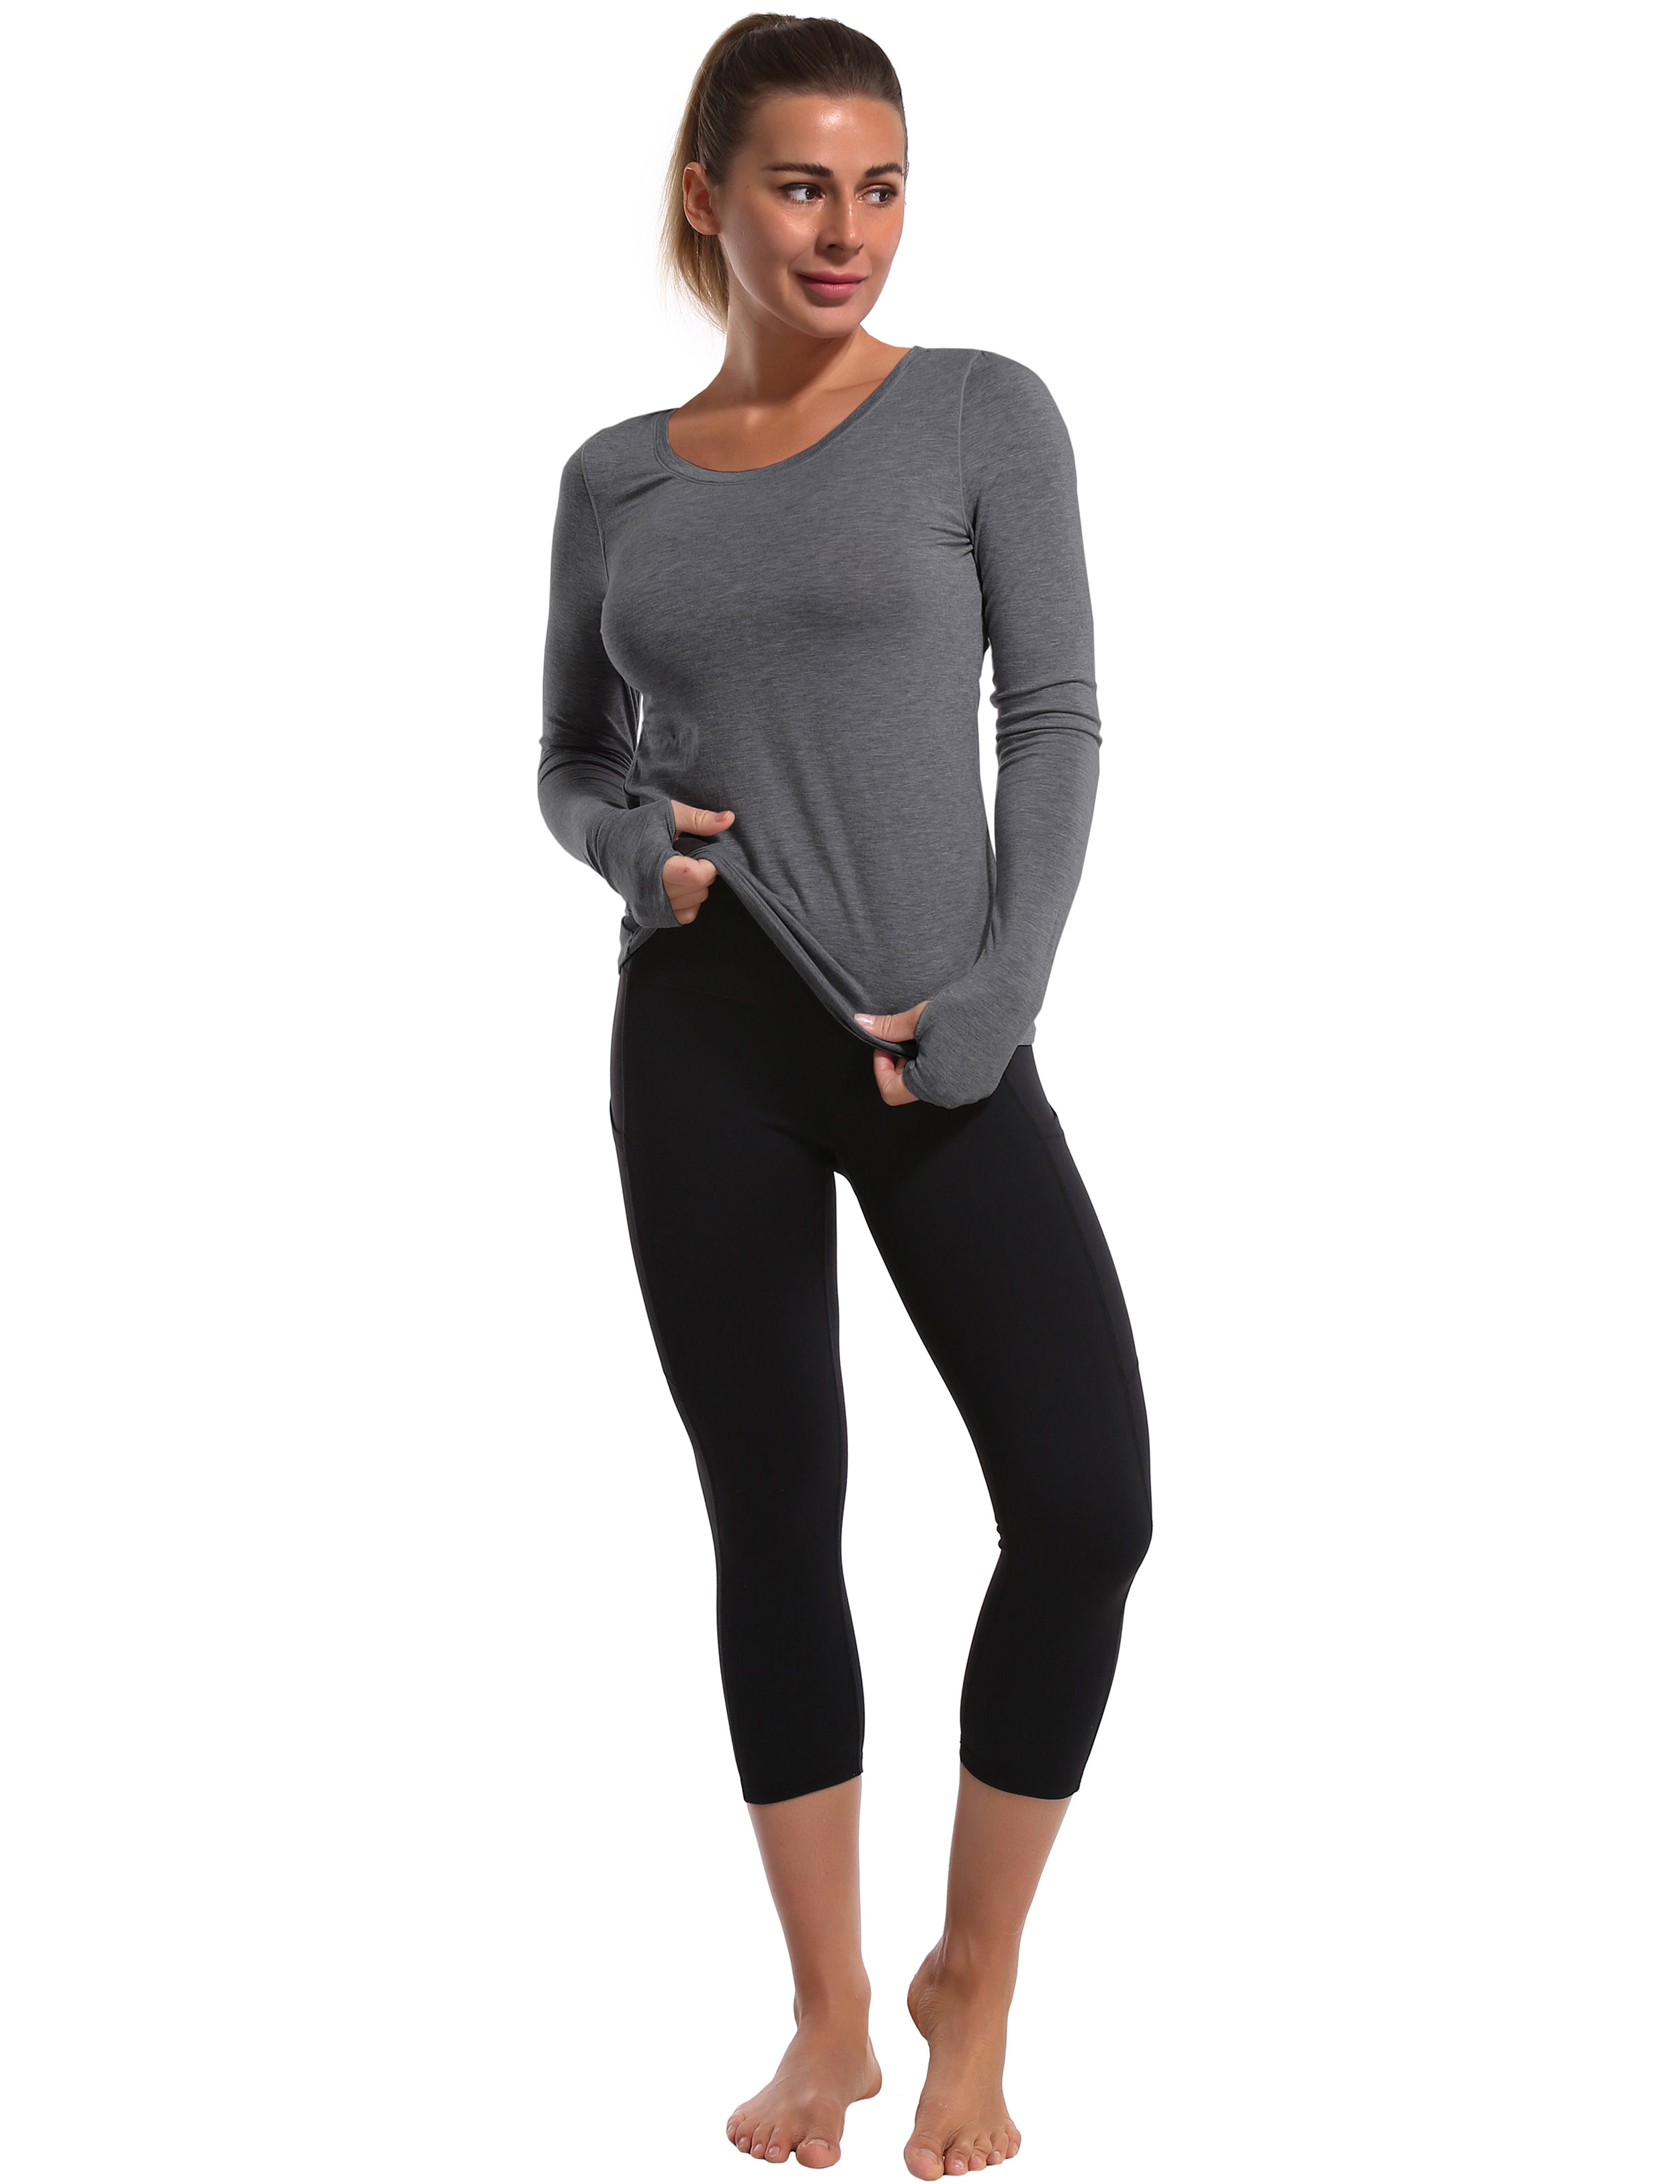 Open Back Long Sleeve Tops heathercharcoal Designed for On the Move Slim fit 93%Modal/7%Spandex Four-way stretch Naturally breathable Super-Soft, Modal Fabric